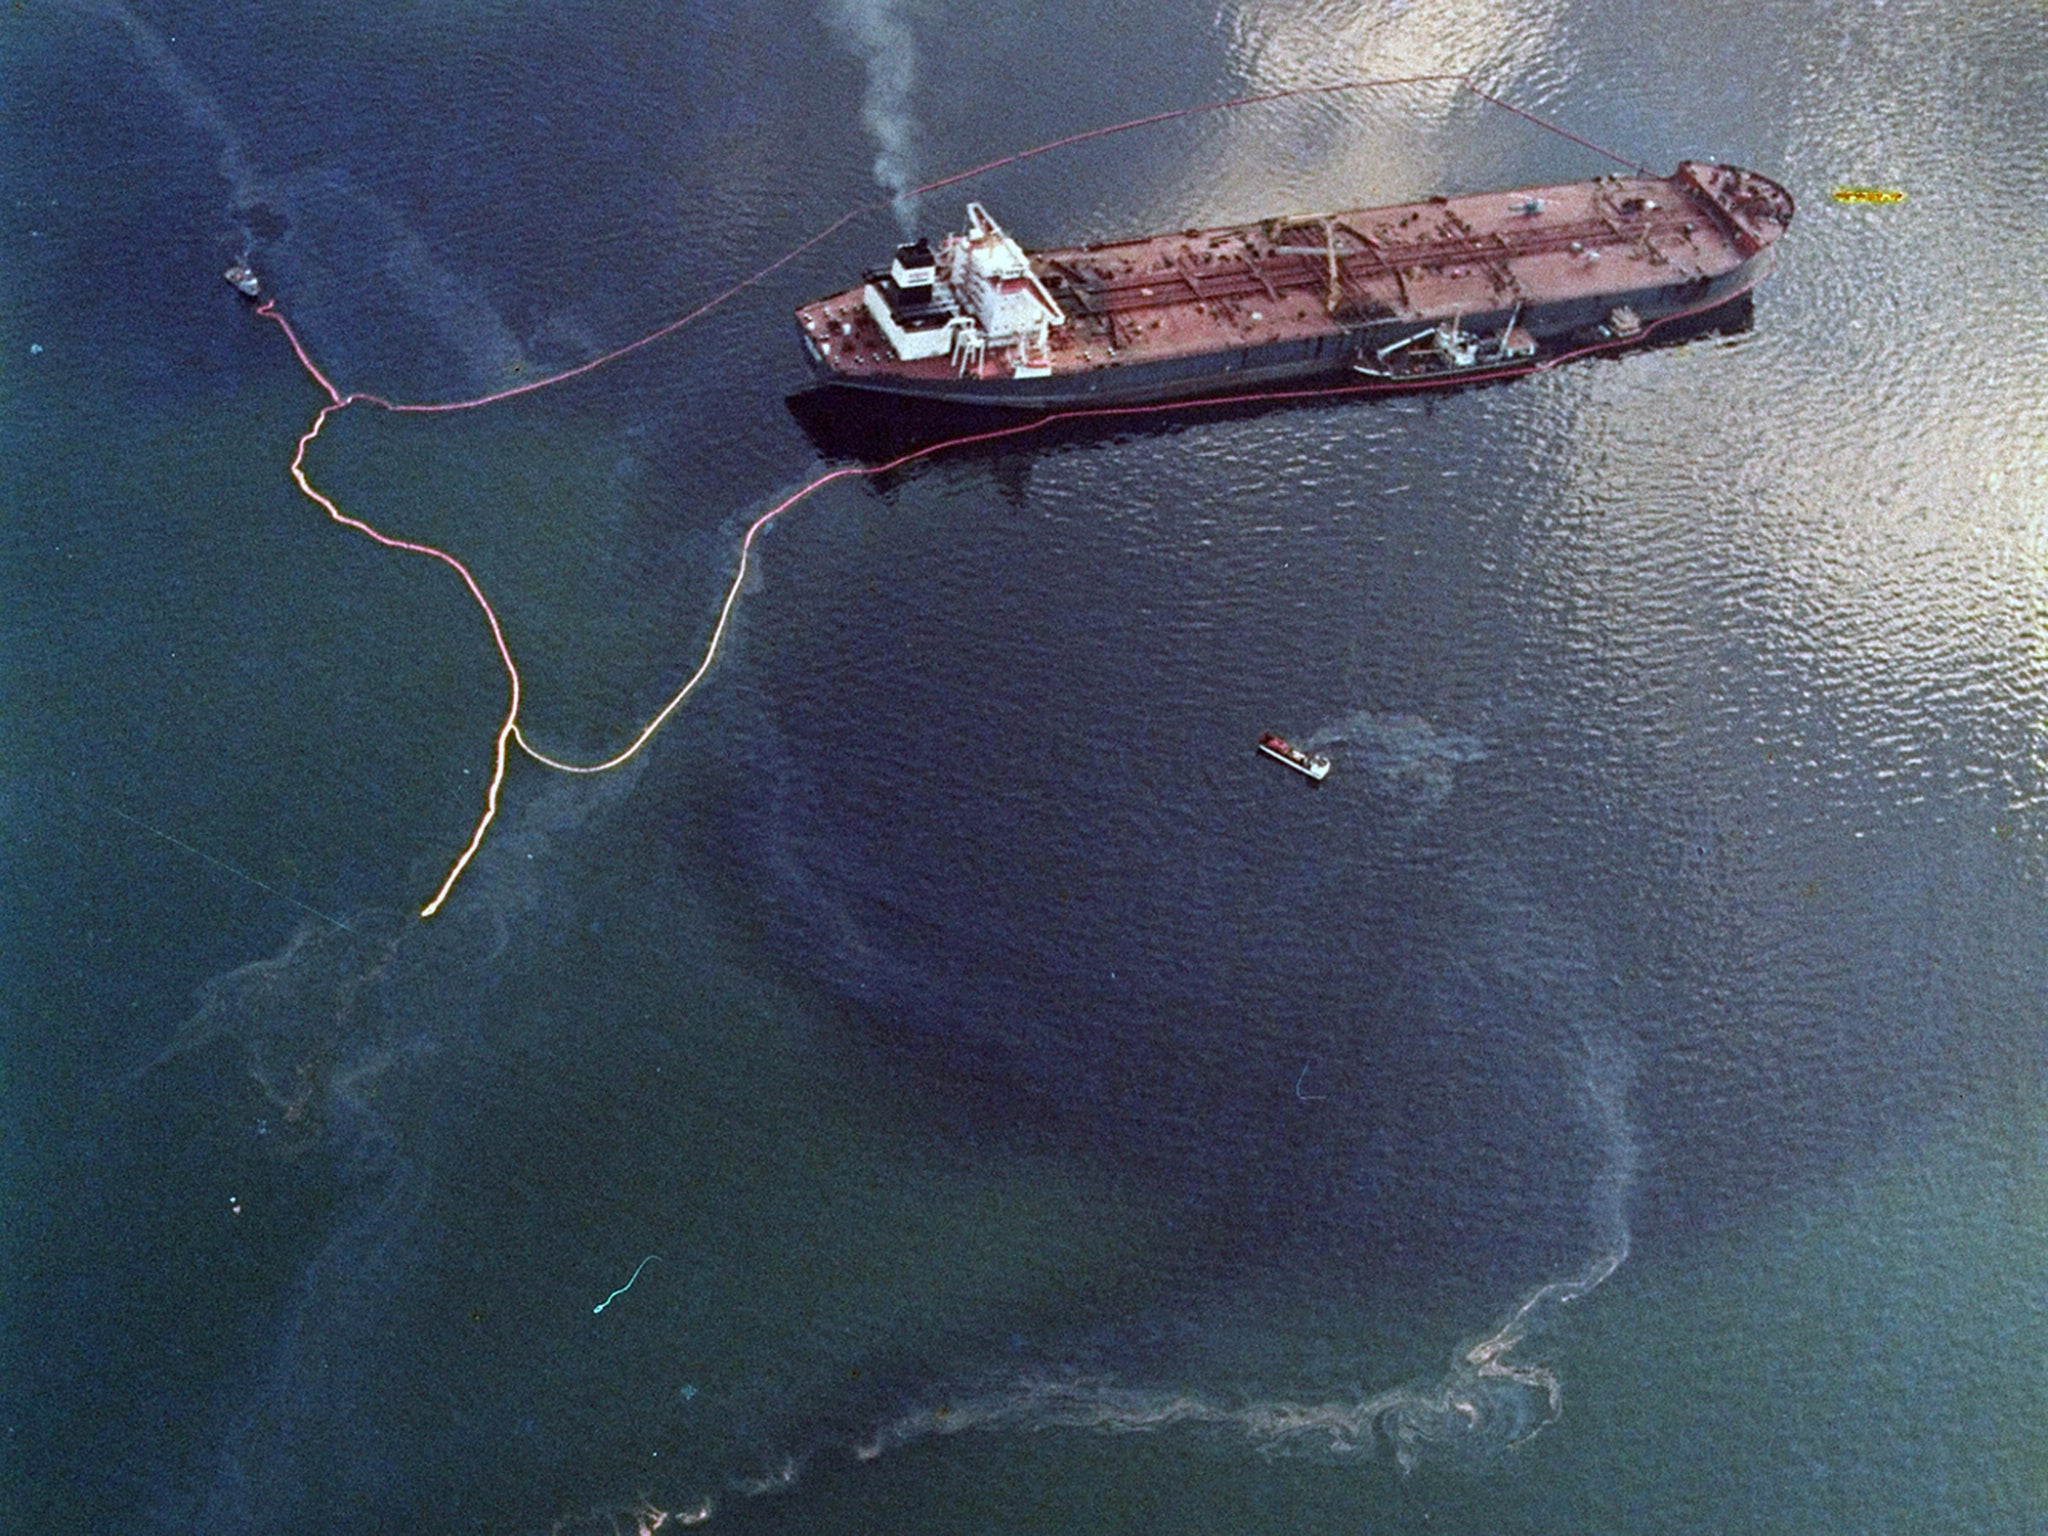 The Exxon Valdez hit Bligh Reef in Prince William Sound, Alaska, in 1989, spilling a million barrels of oil in one of the world’s worst such disasters